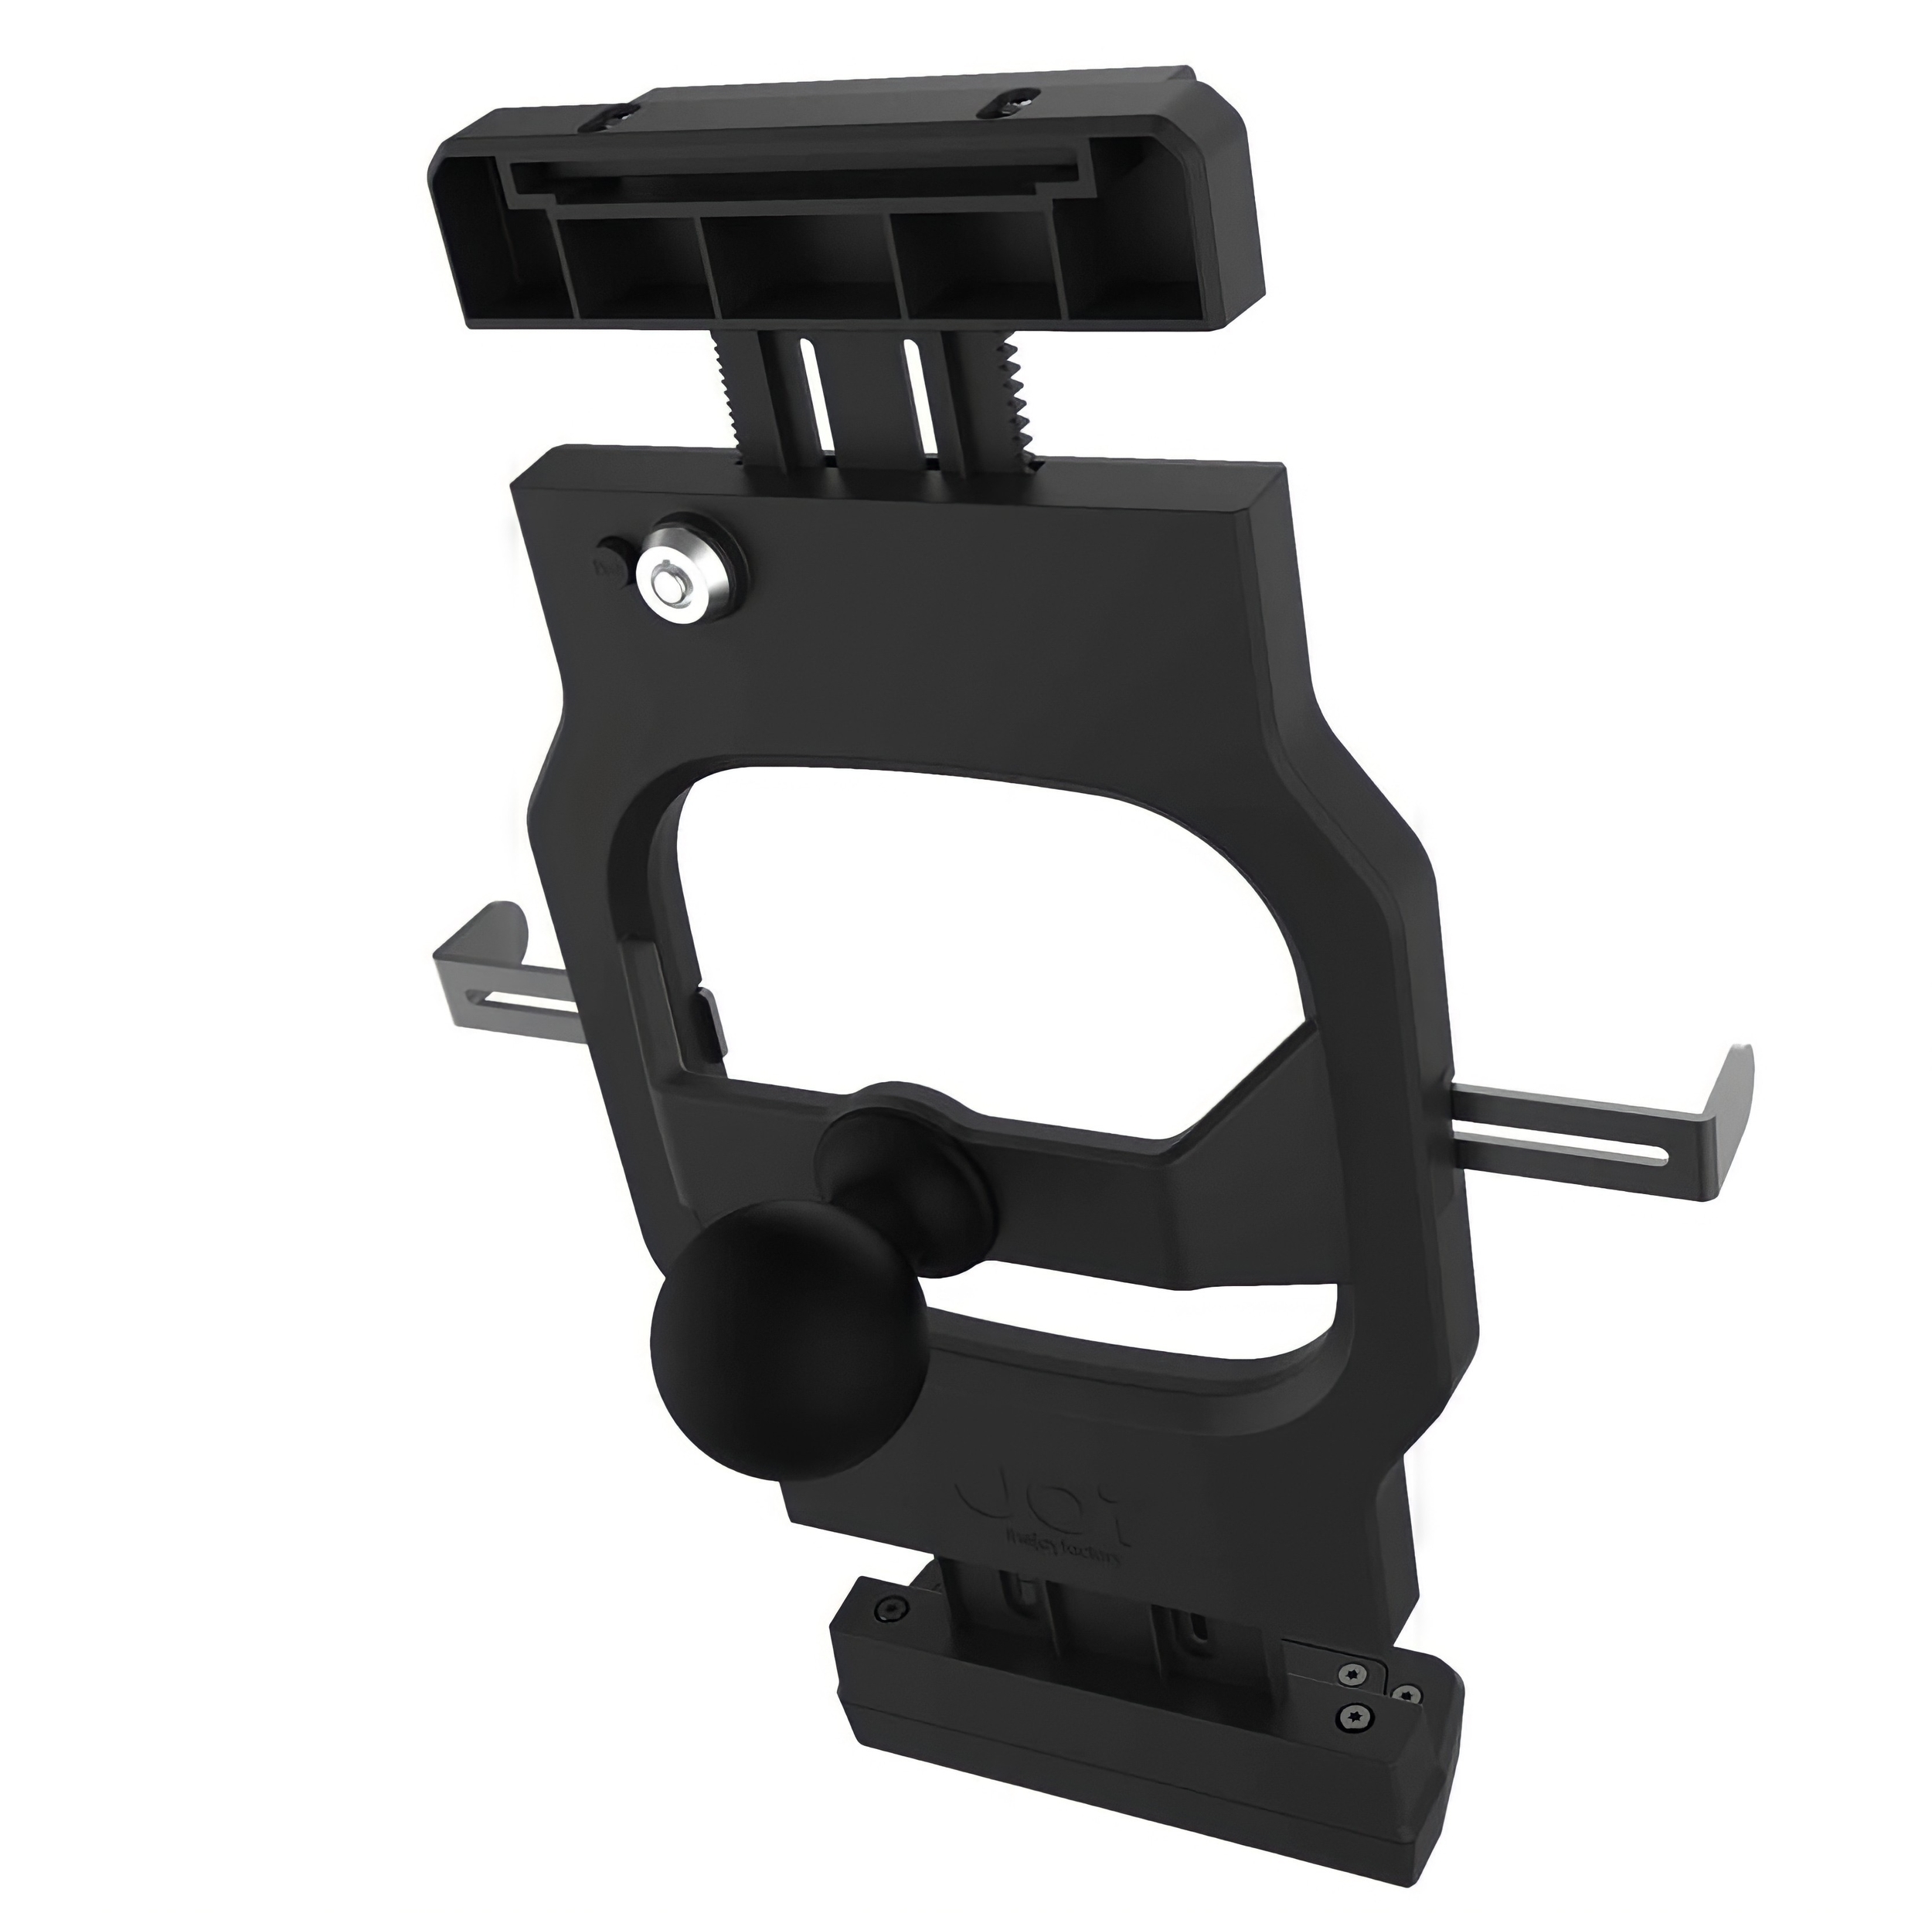 REF 2853 Support et Charge Axtion Volt Stand iPAD Mini 6 8.3 pouces